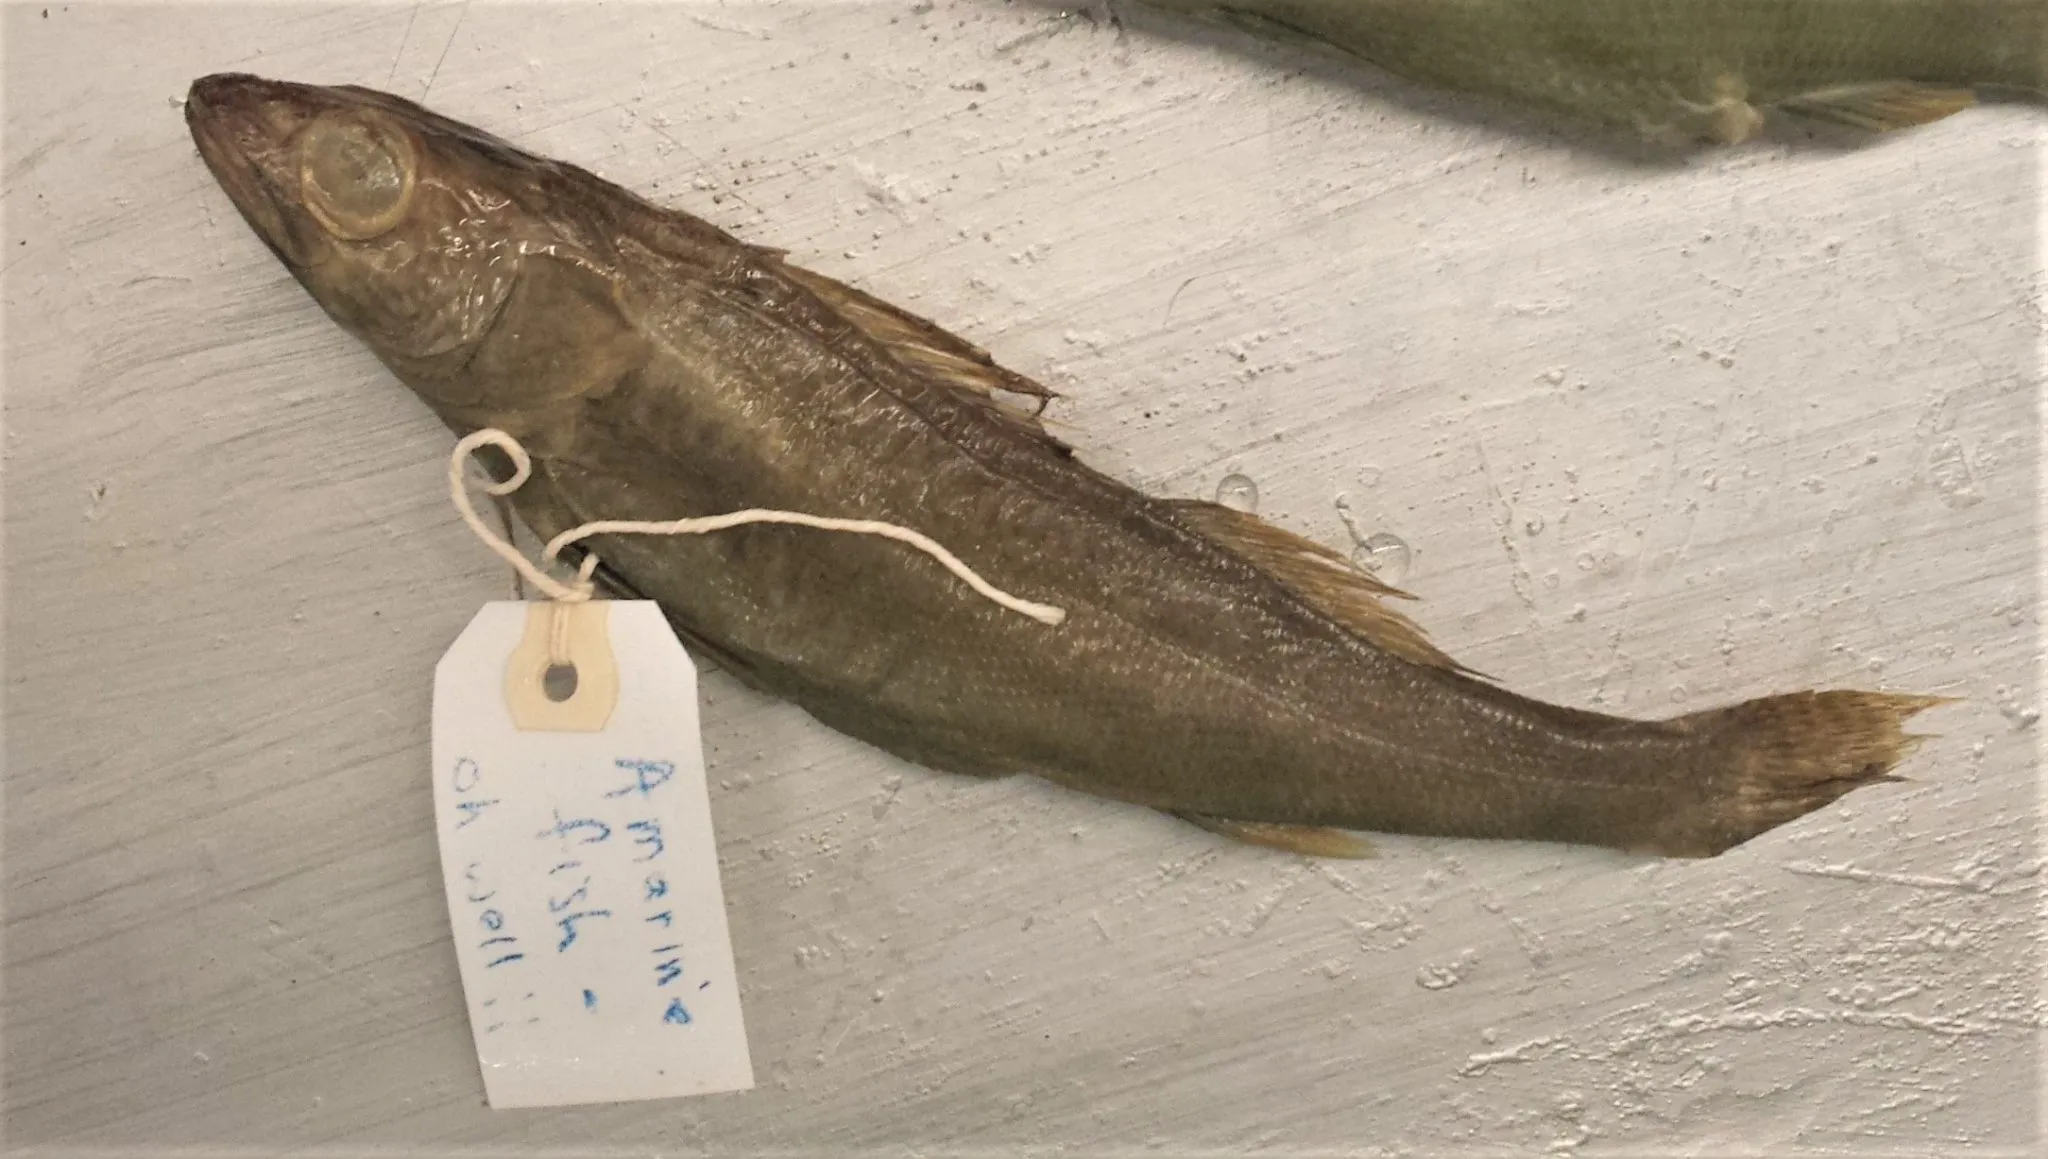 A preserved fish specimen with a name tag